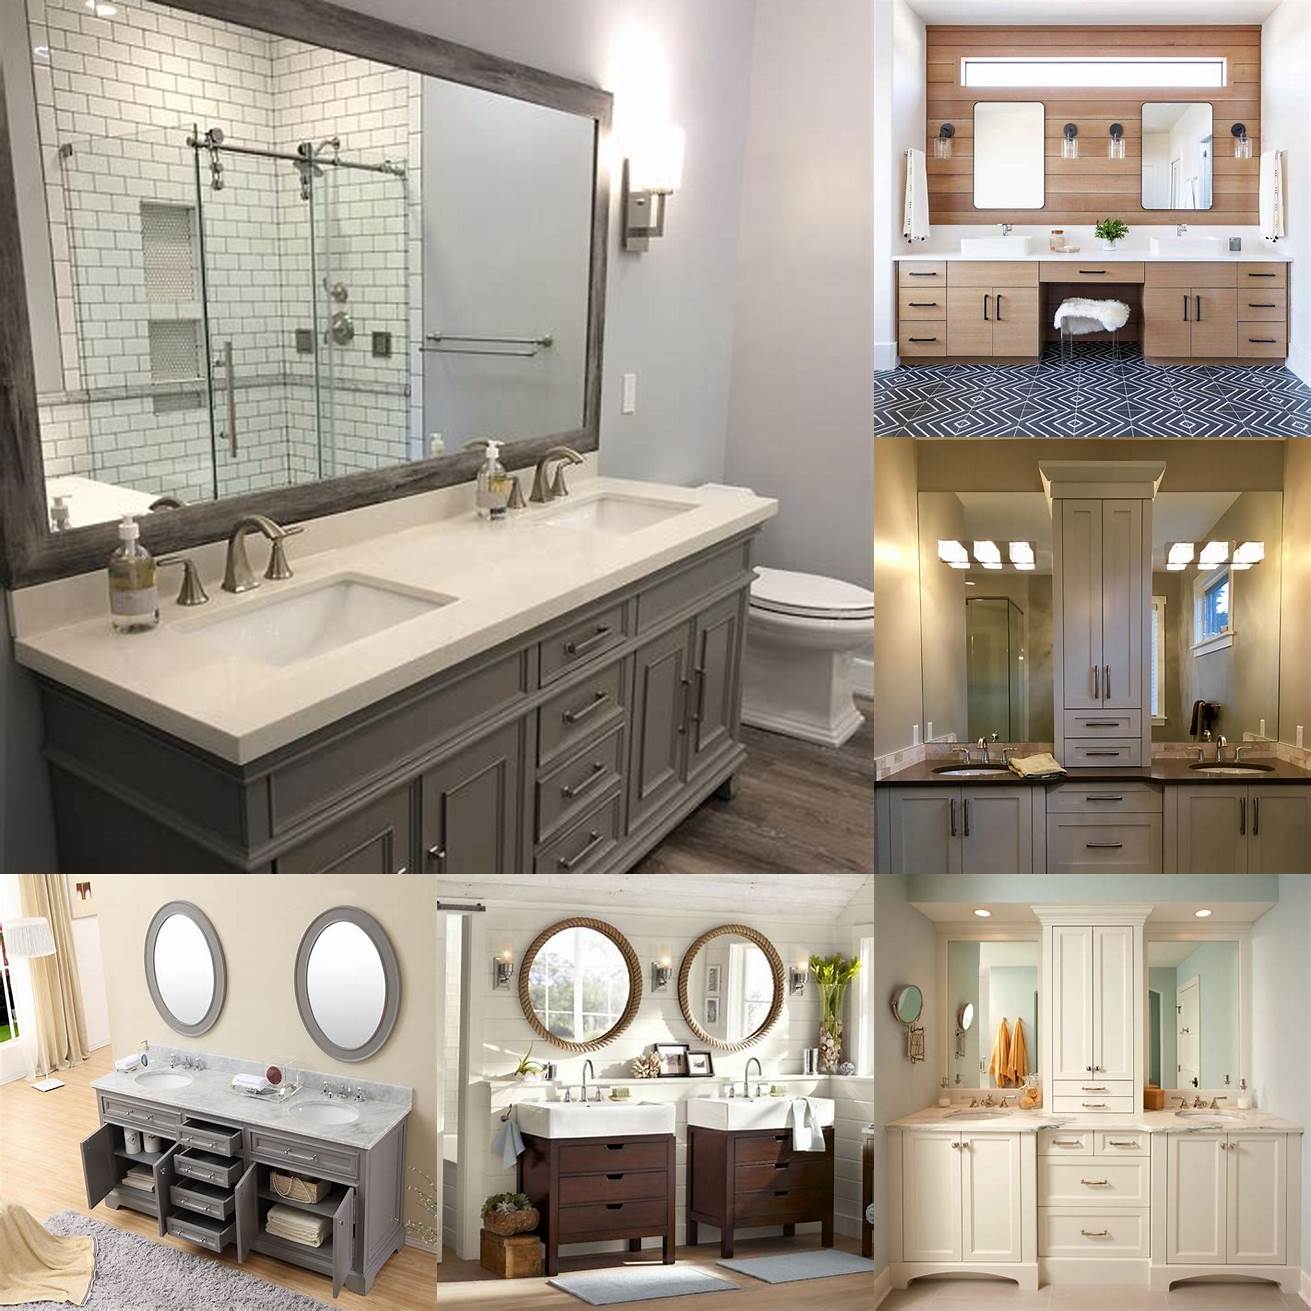 A double guest bathroom vanity with two sinks and ample storage space